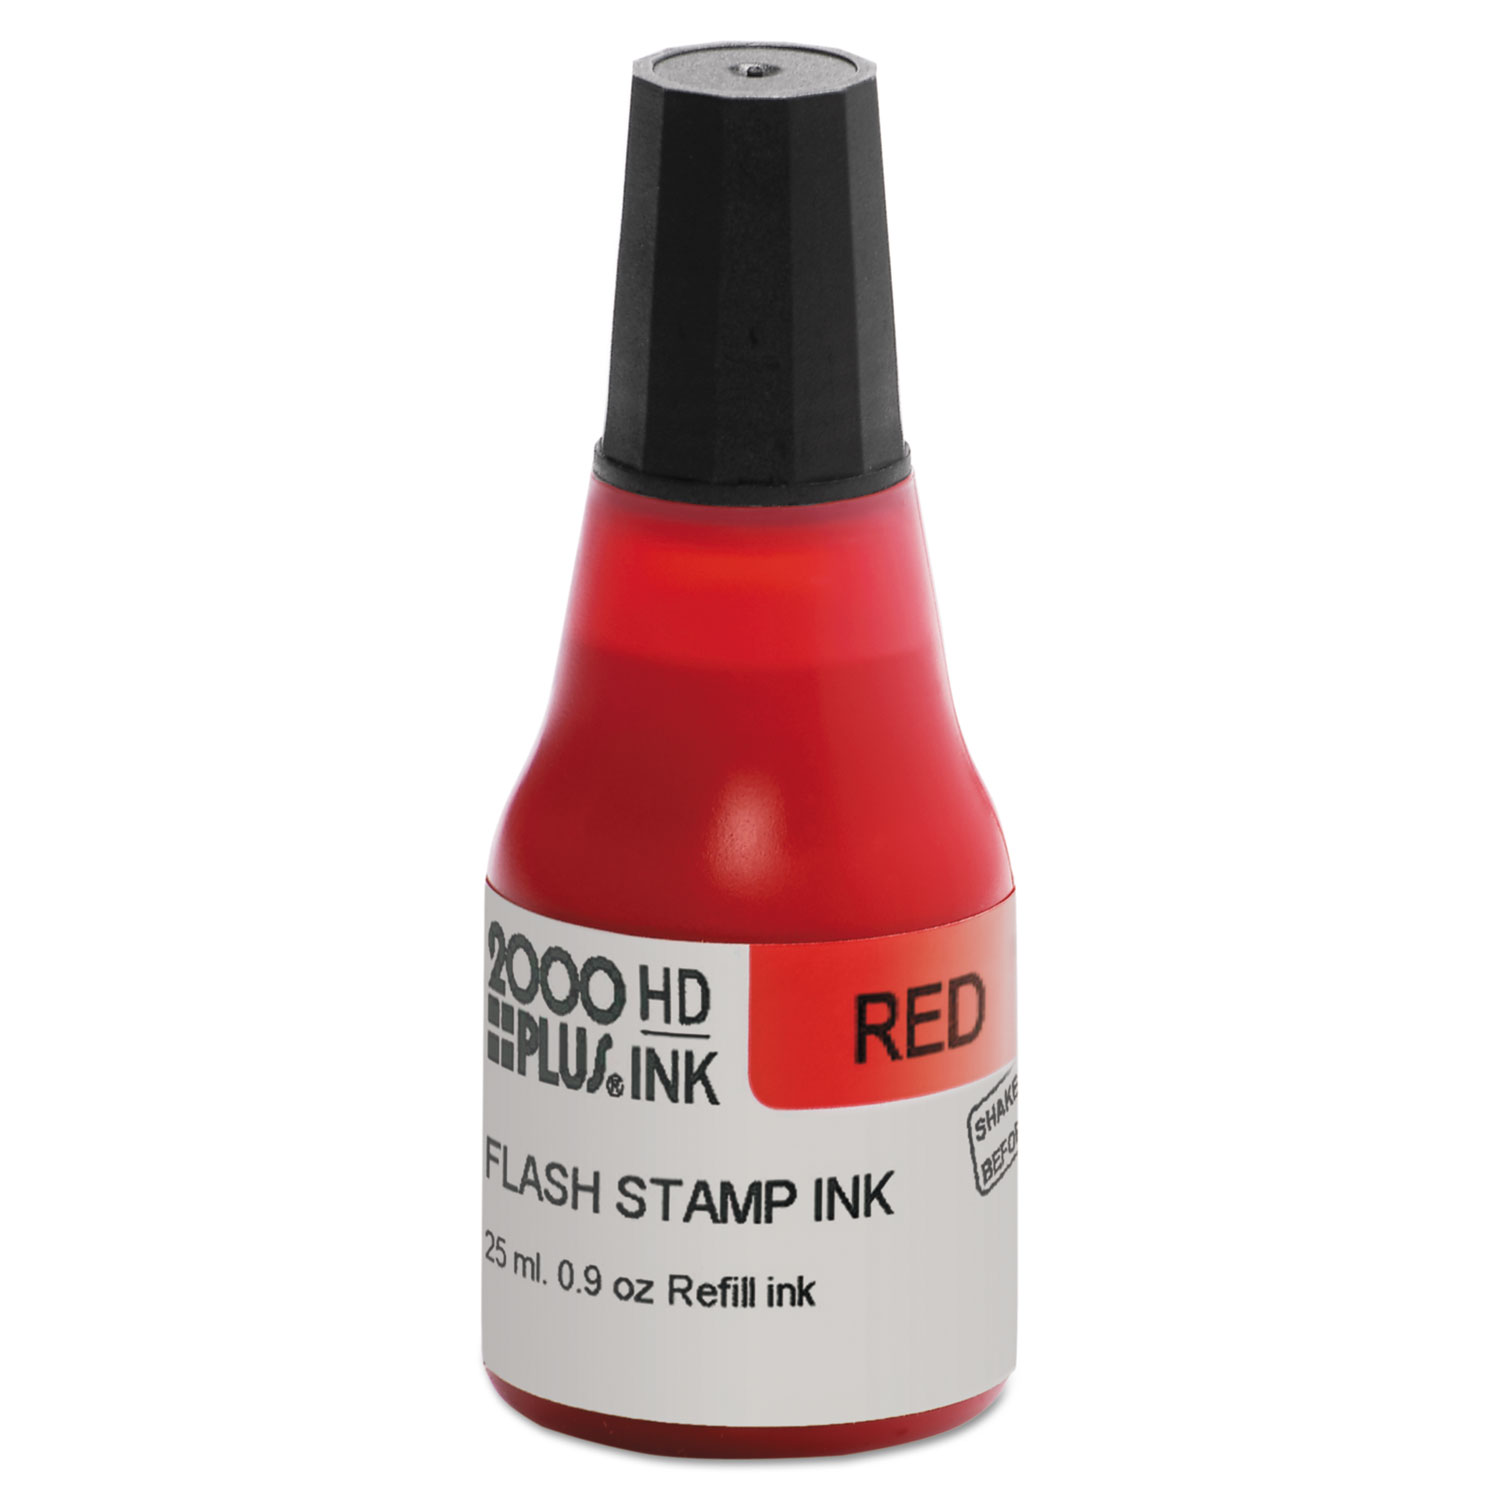  COSCO 2000PLUS 033958 Pre-Ink High Definition Refill Ink, Red, 0.9 oz. Bottle (COS033958) 